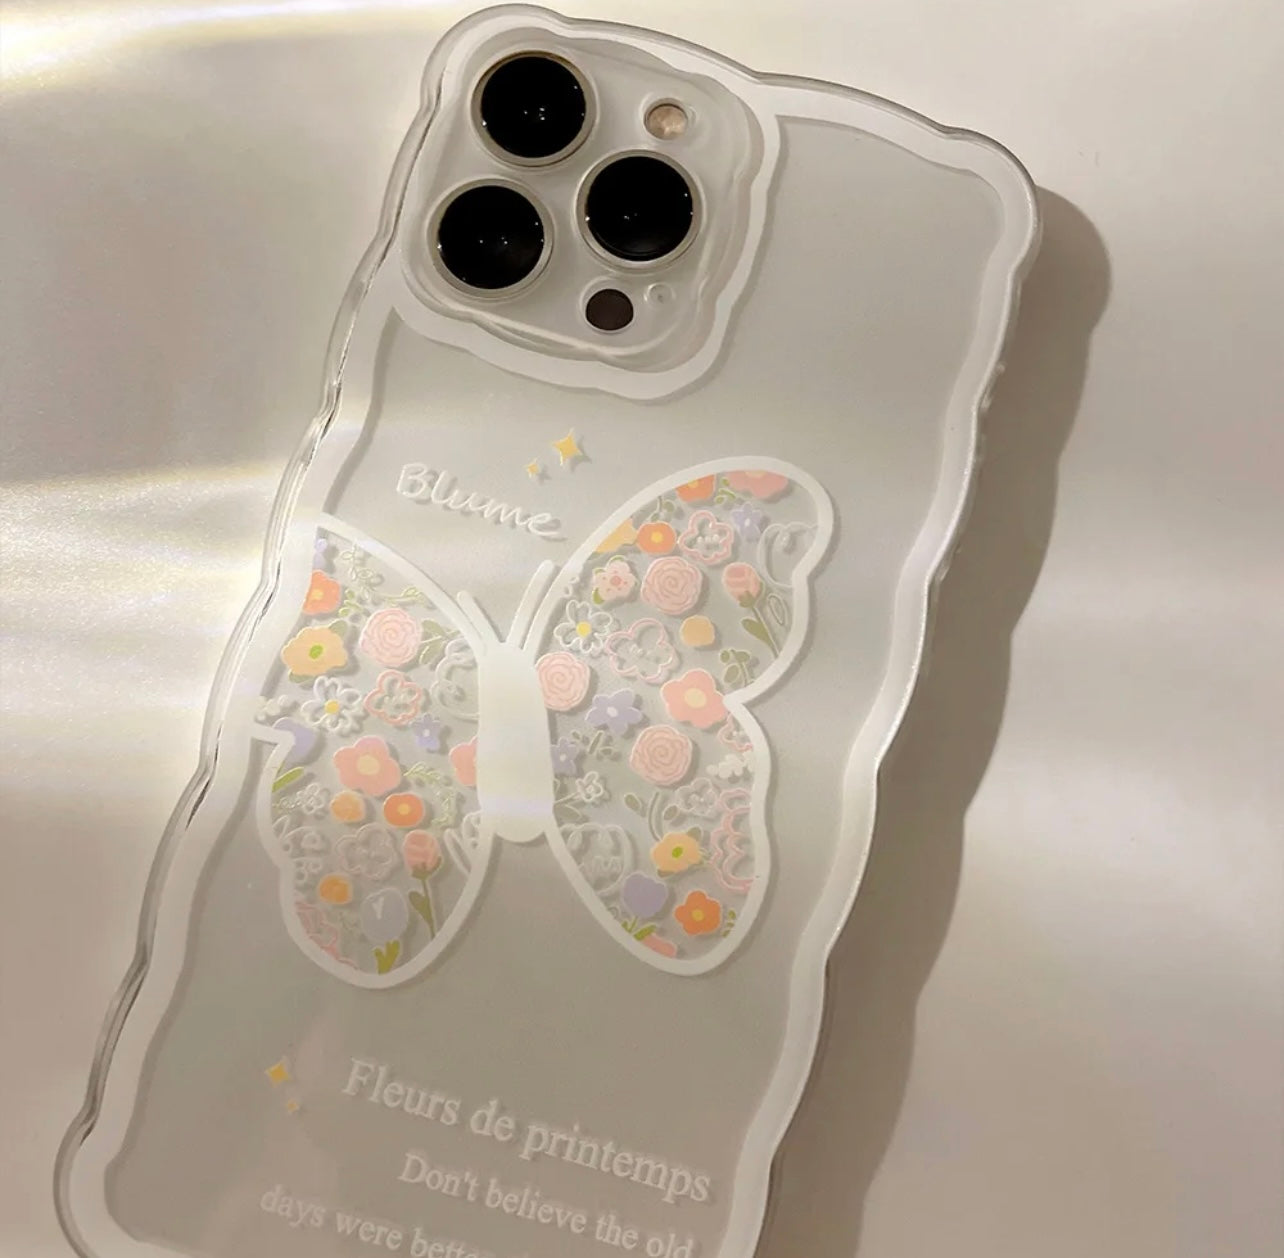 CREATIVE FLOWER AND BUTTERFLY PHONE CASE - GRIP GADGETS